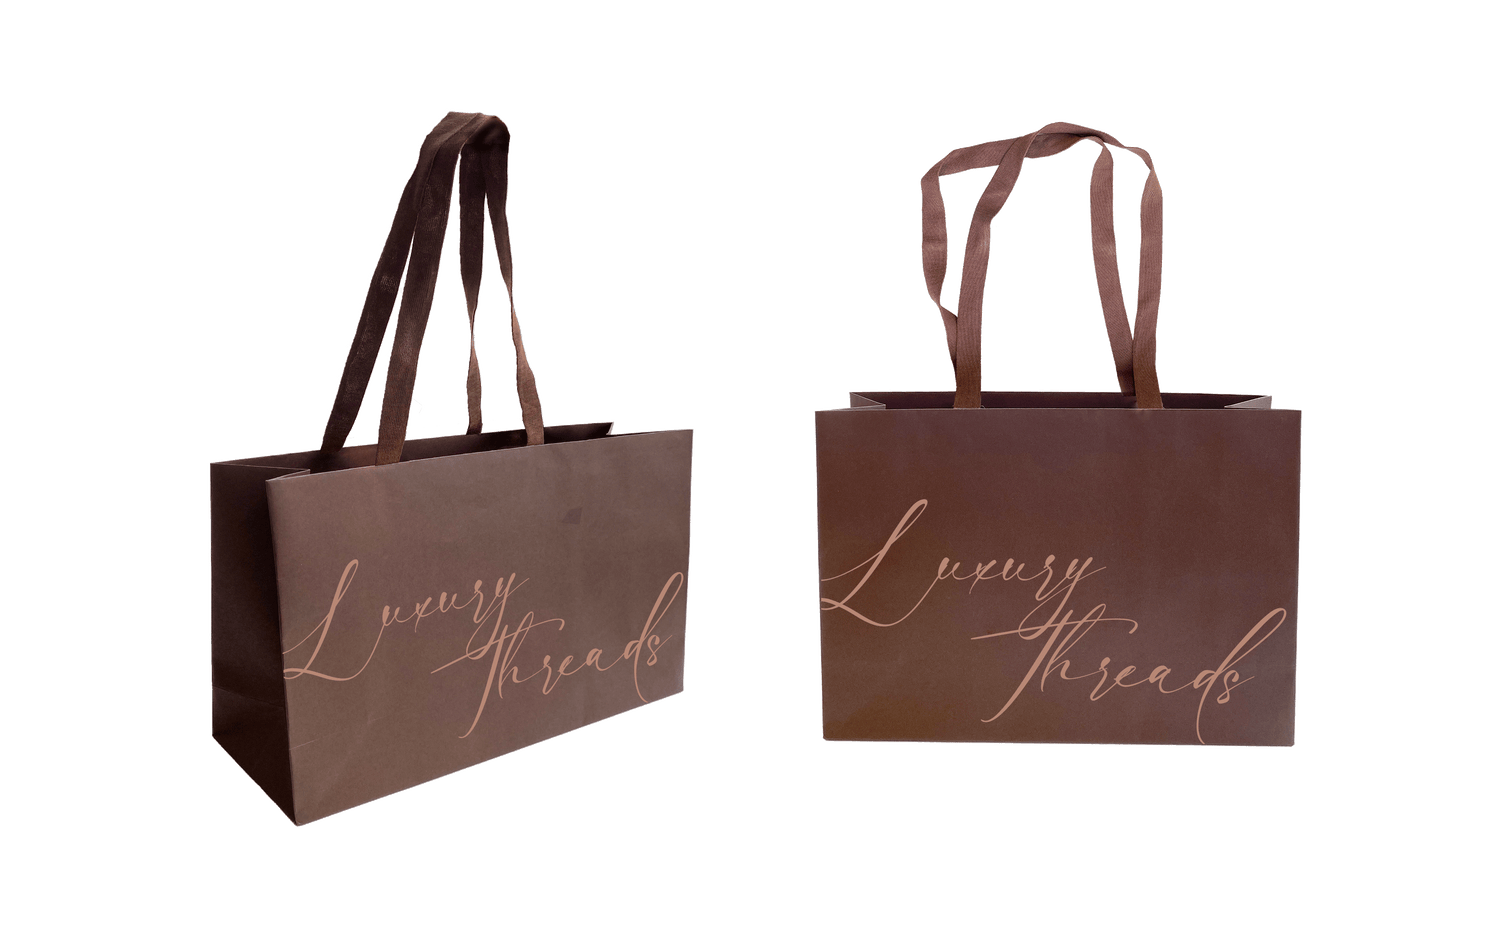 Custom printed brown Better Packaging bamboo retail bags on transparent background